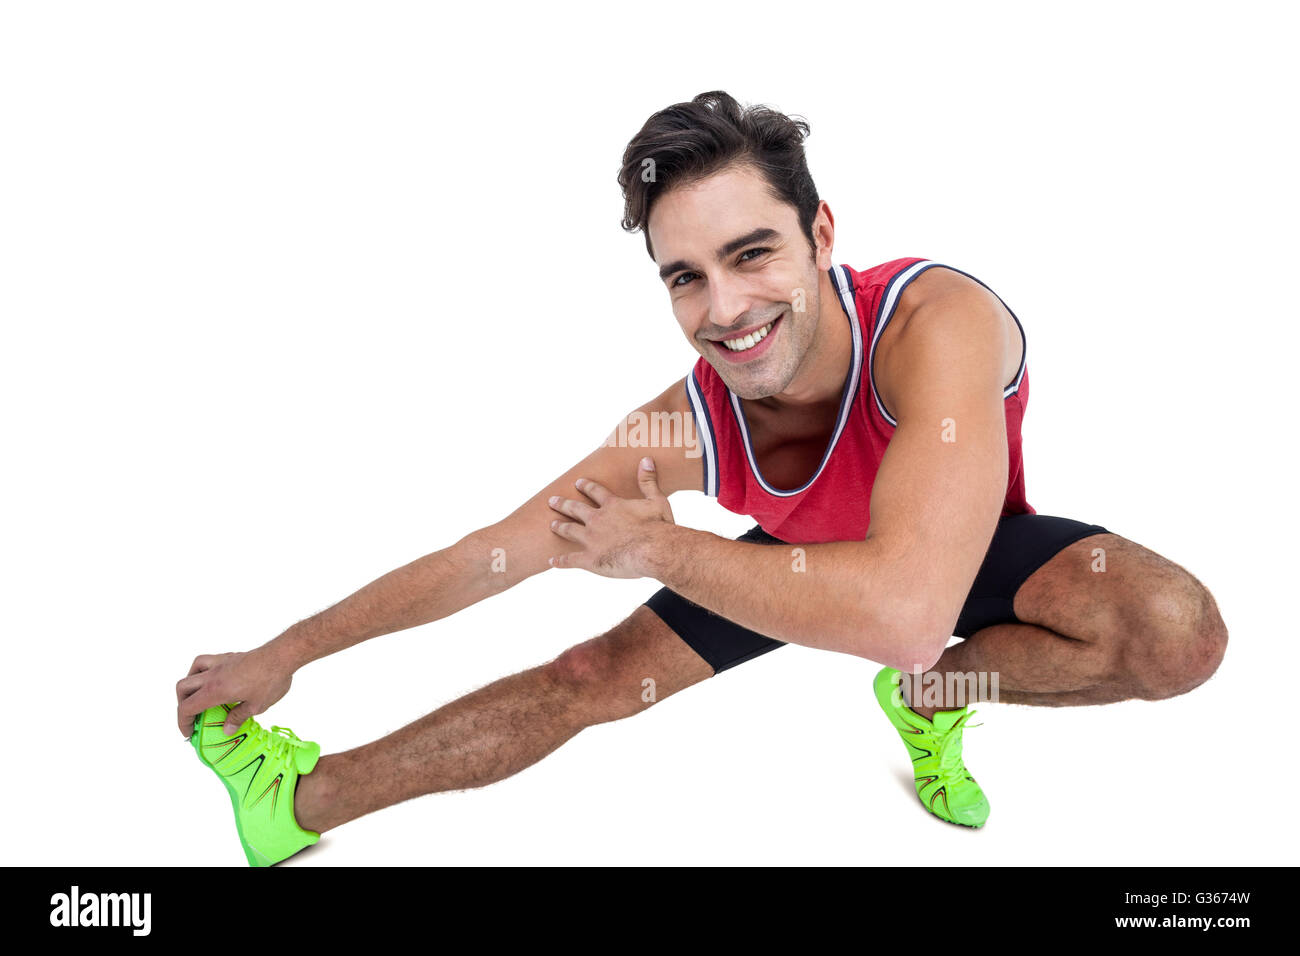 Portrait of male athlete stretching his hamstring Stock Photo